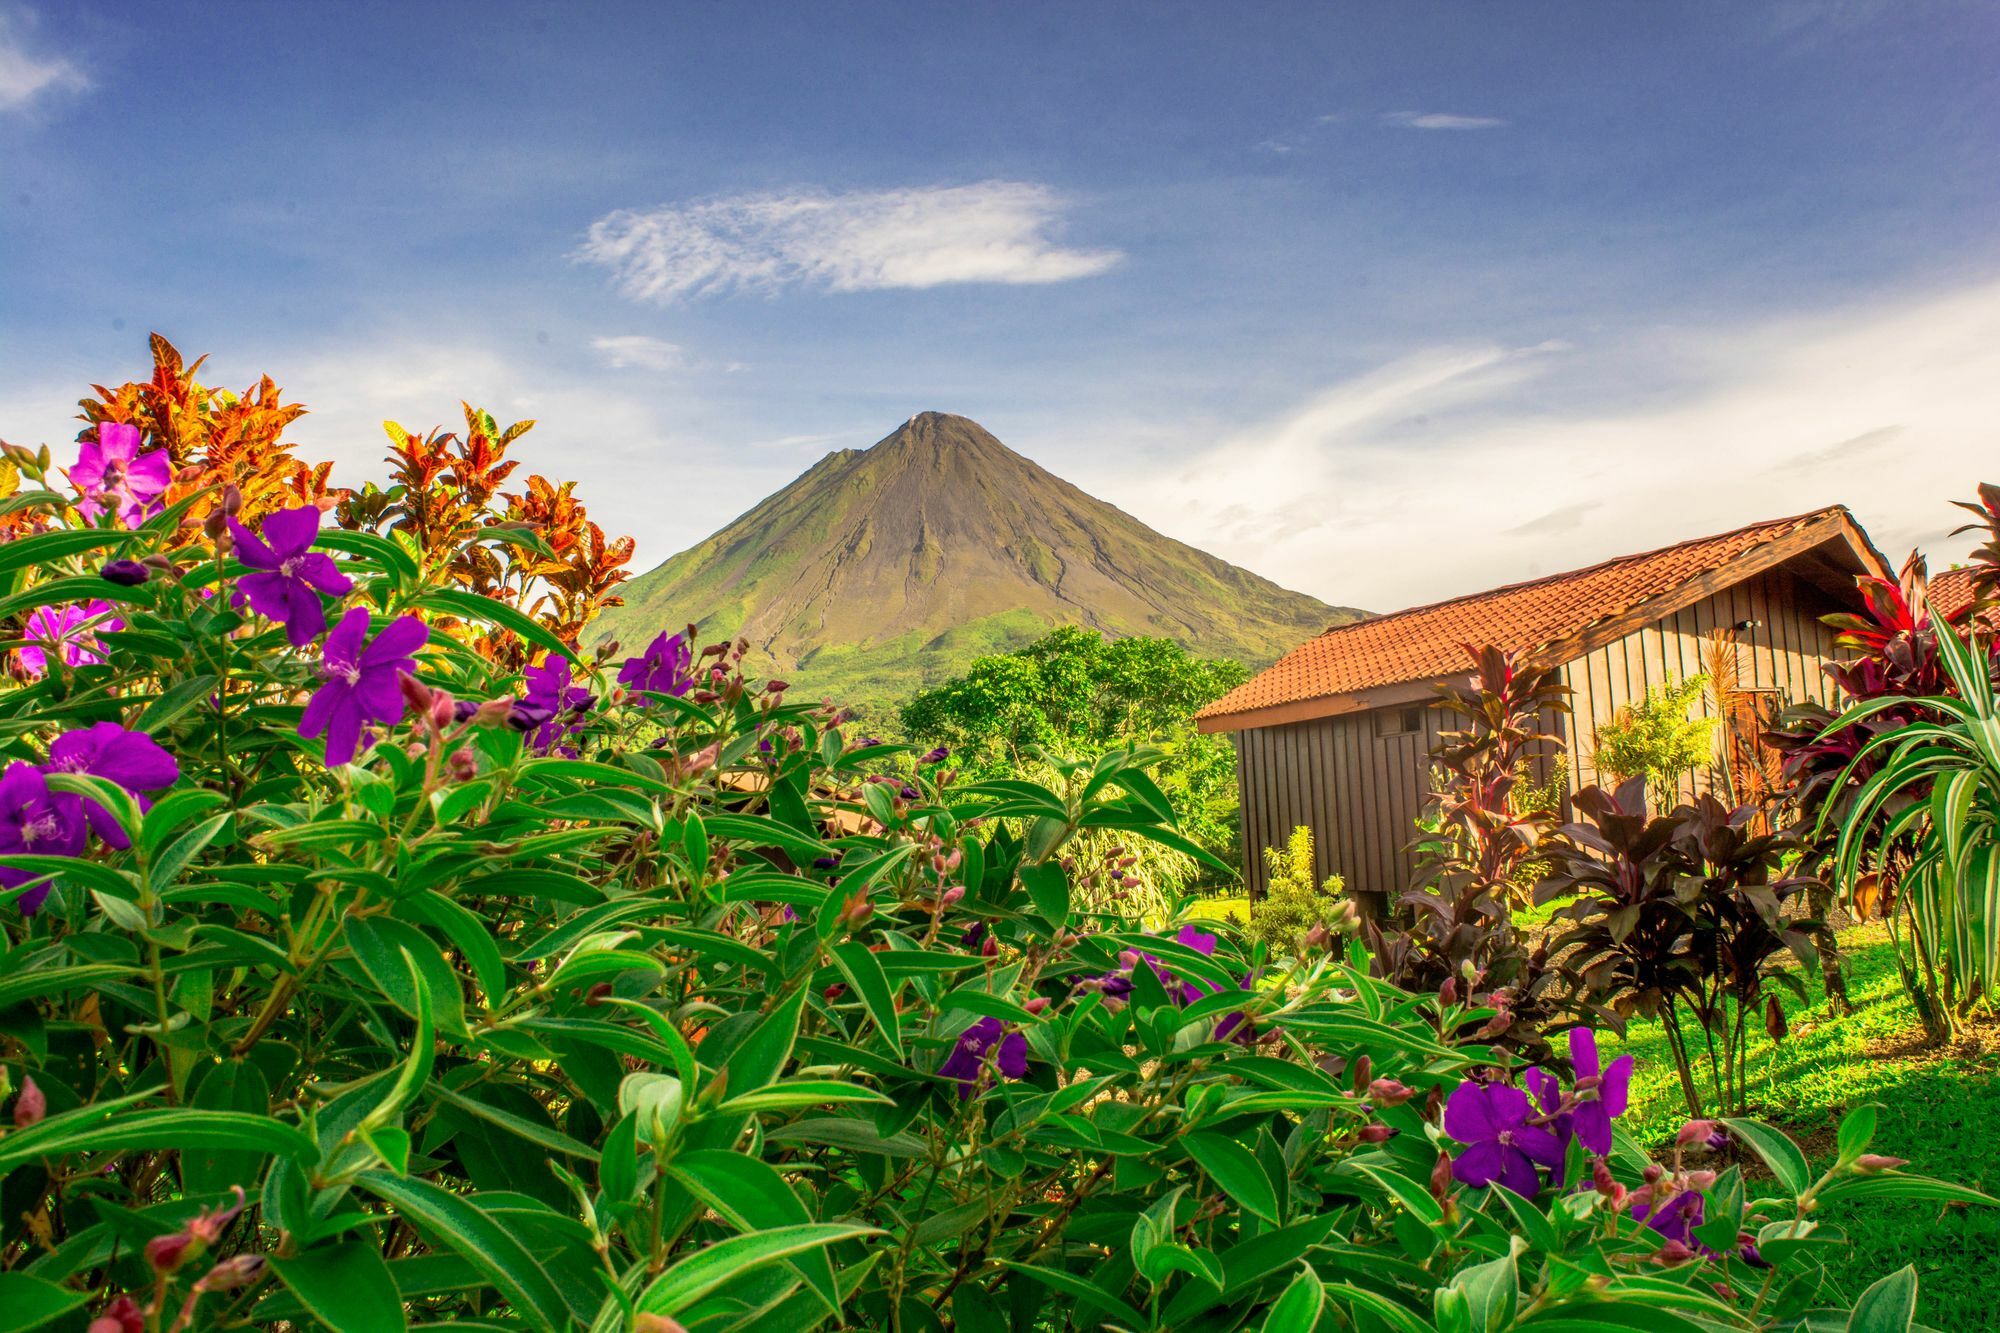 HOTEL ARENAL BUNGALOWS LA FORTUNA 2* (Costa Rica) - from C$ 75 | iBOOKED